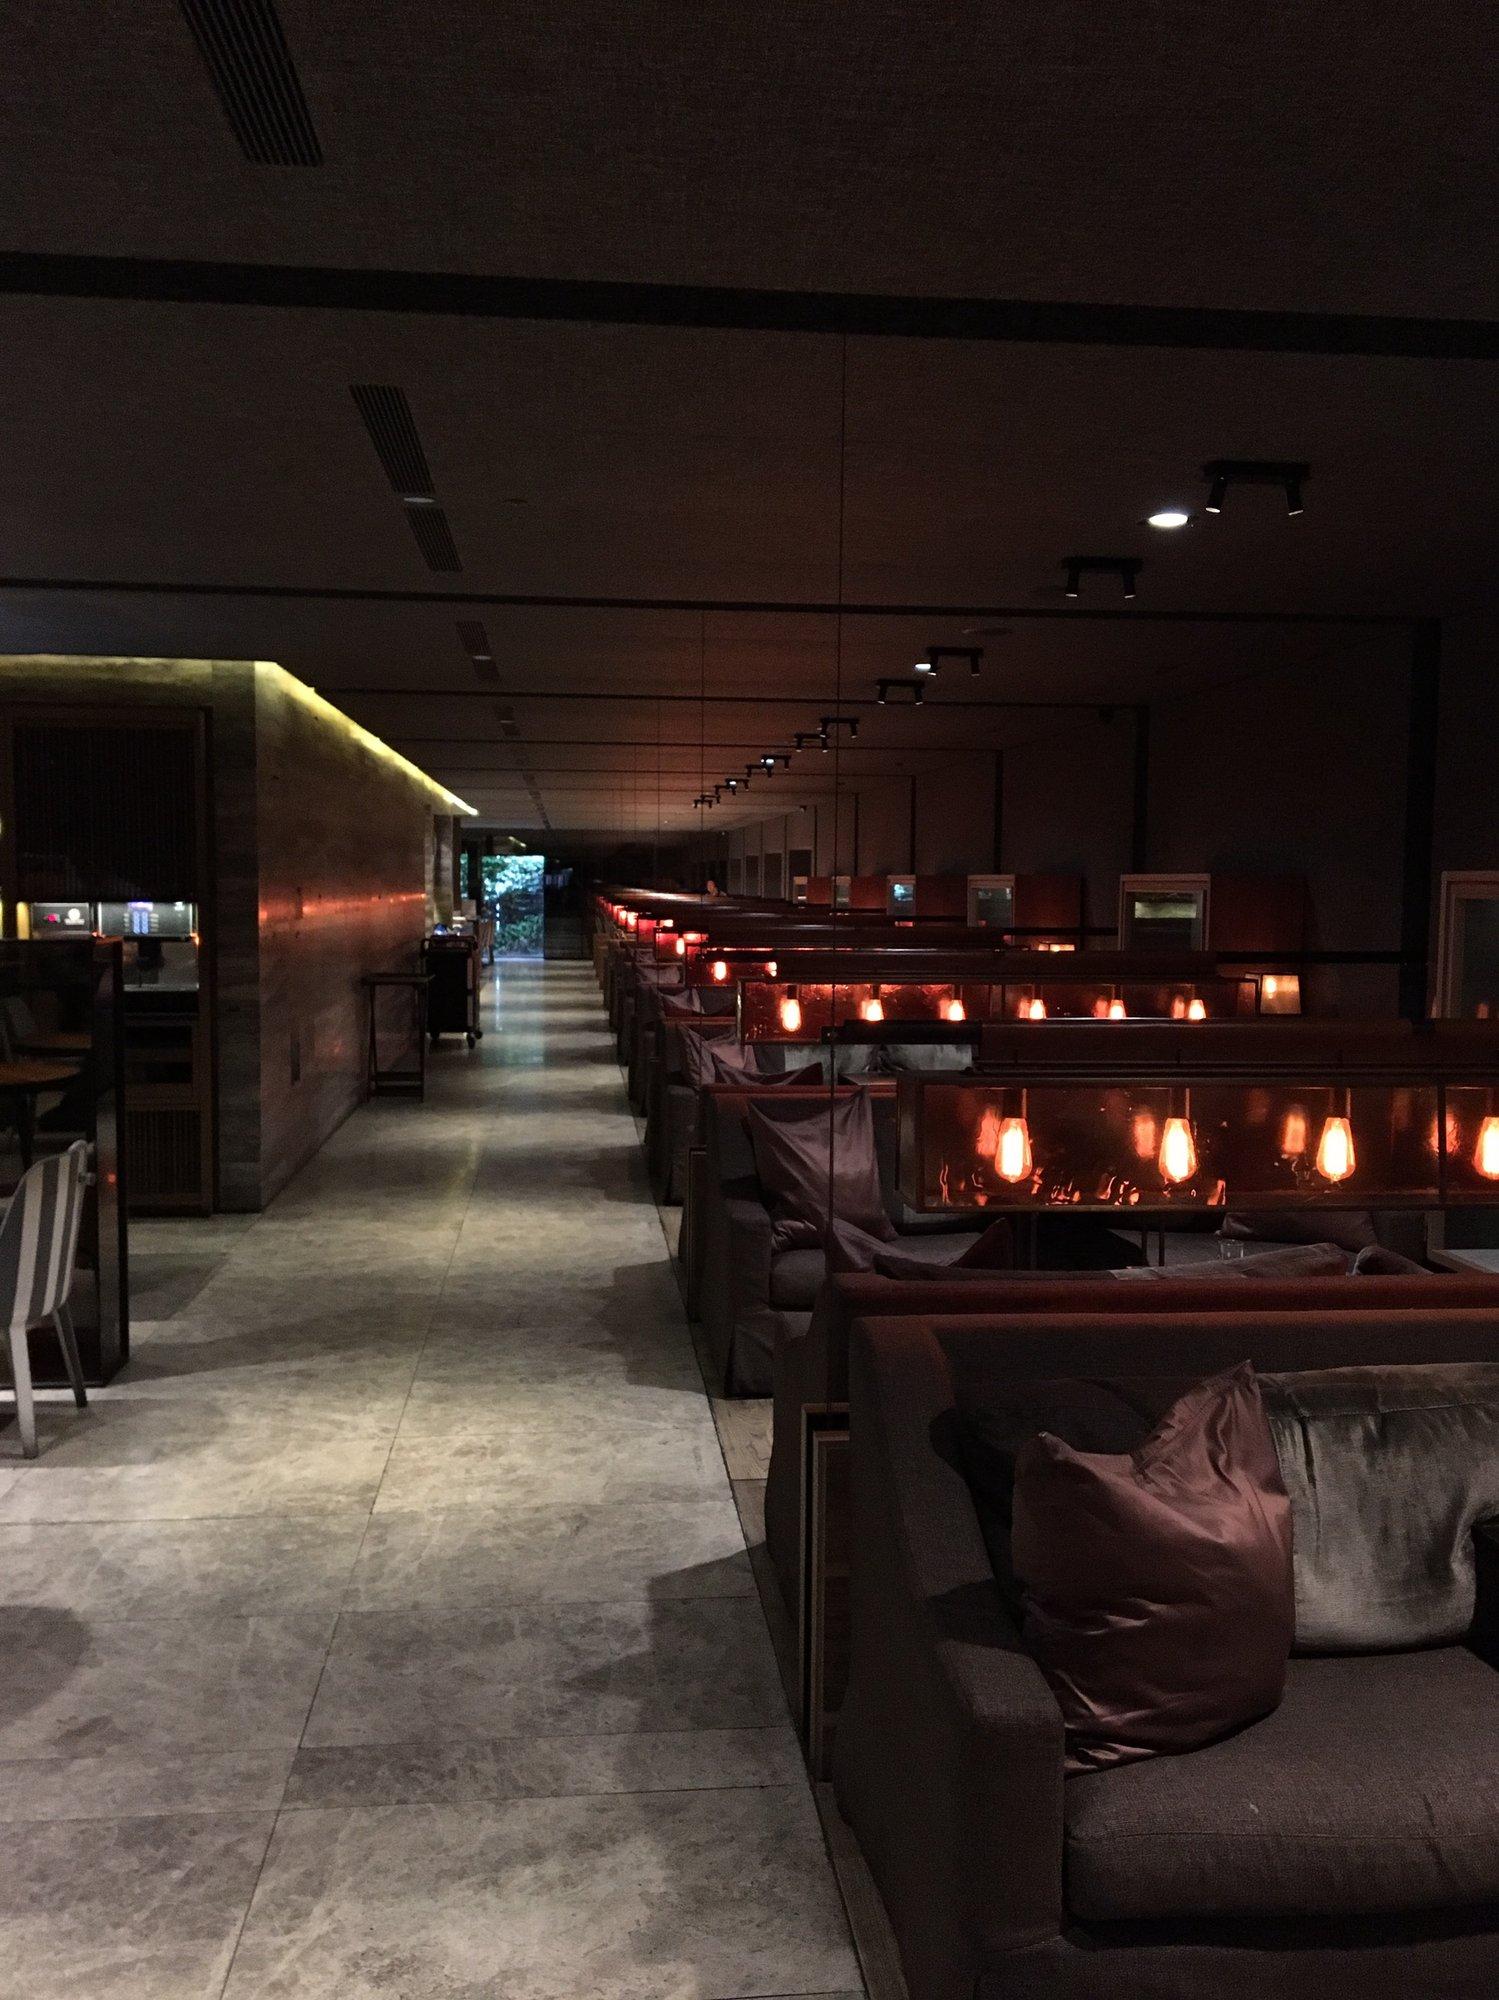 China Airlines Lounge (V1) image 22 of 44